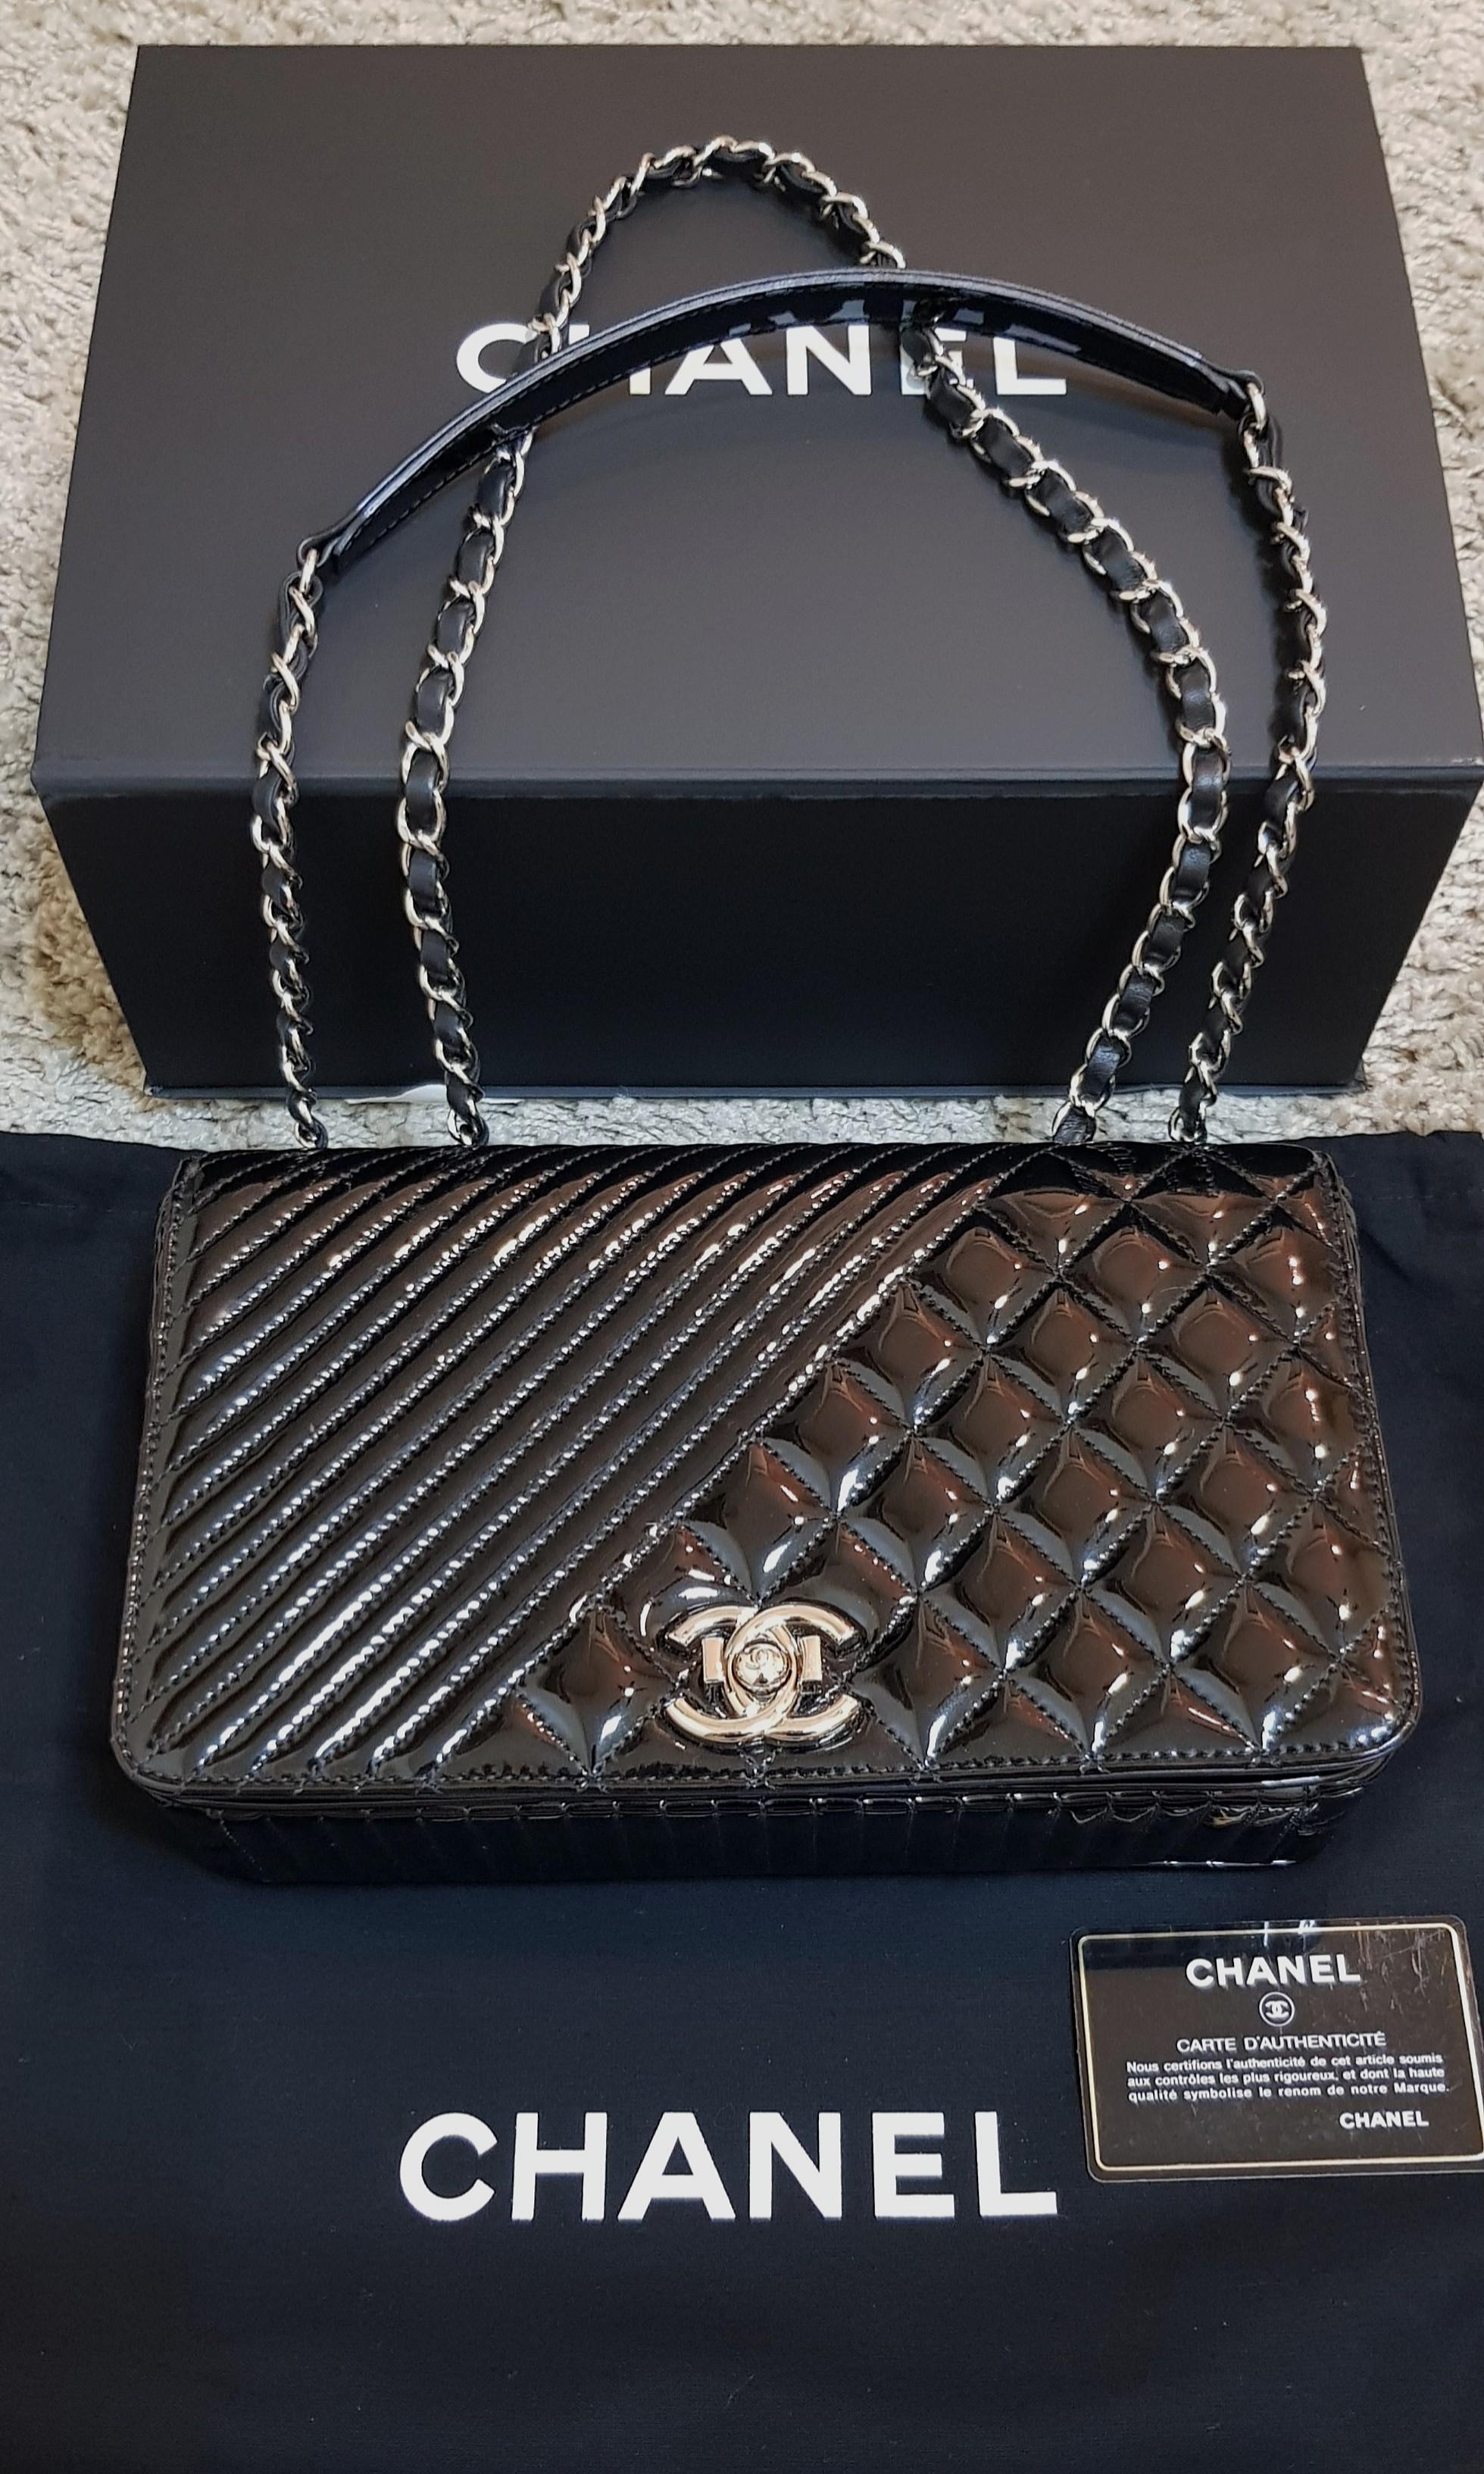 Chanel diamond quilted Chevron flap bag